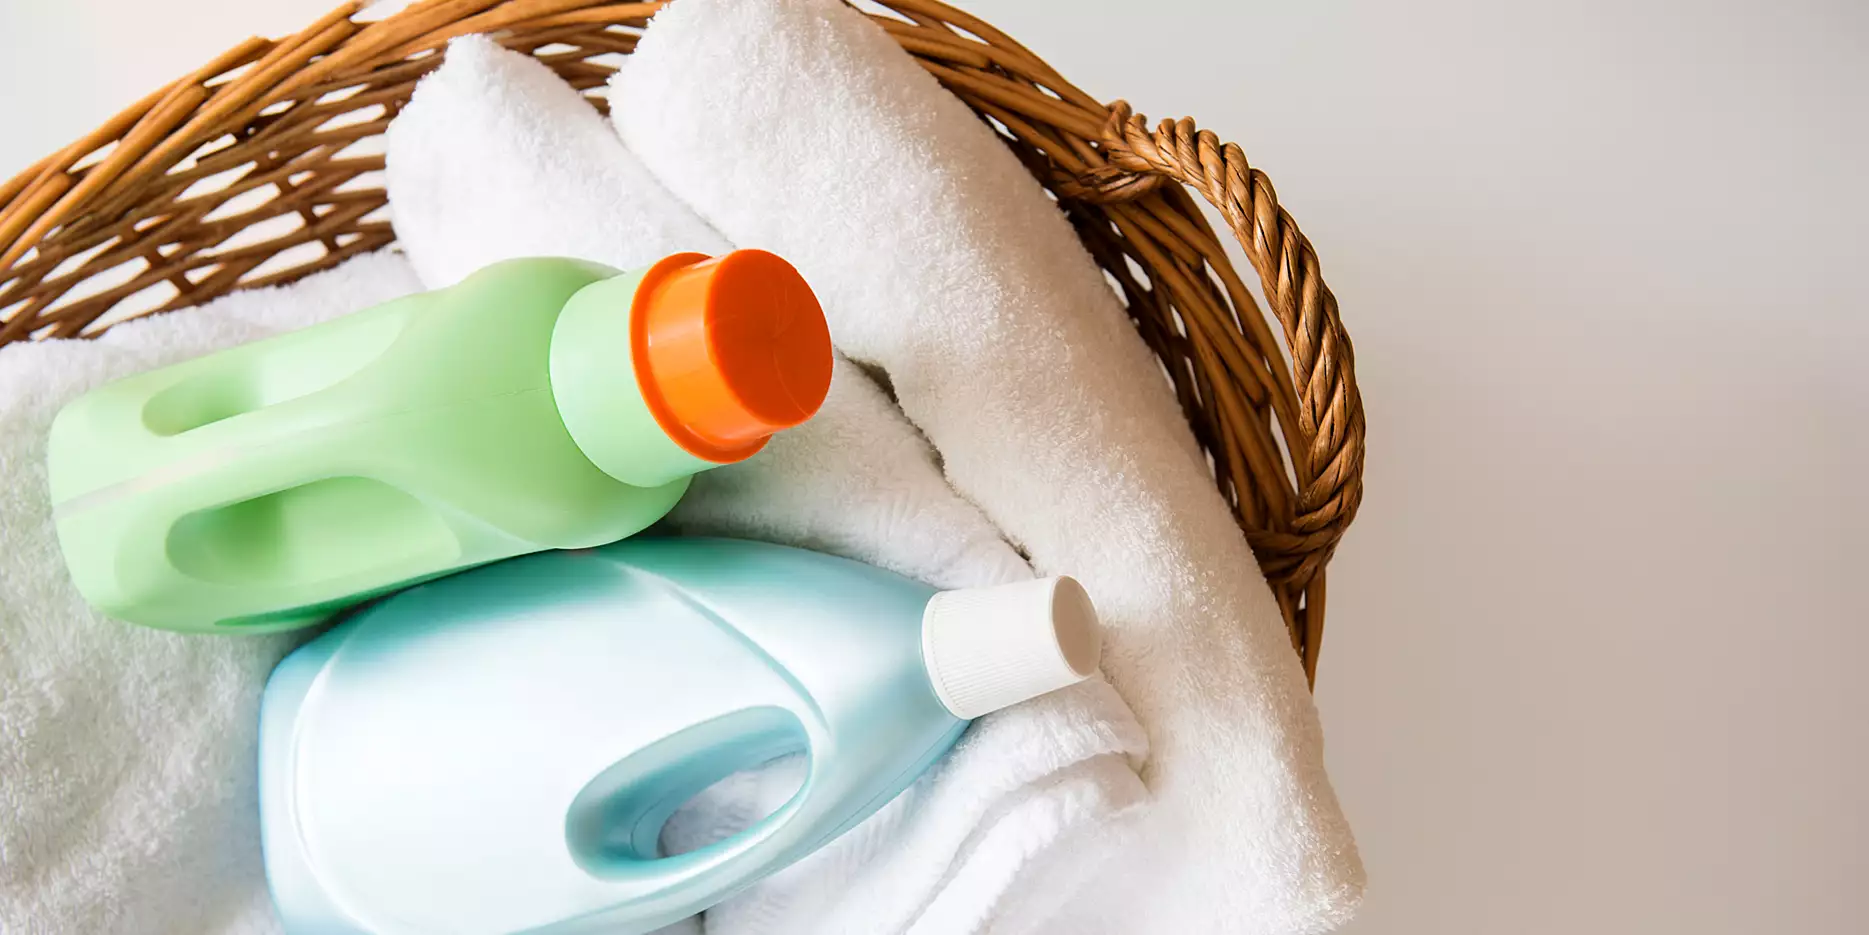 8 Reasons Why Everyone Should Use A Fabric Conditioner While Doing Laundry